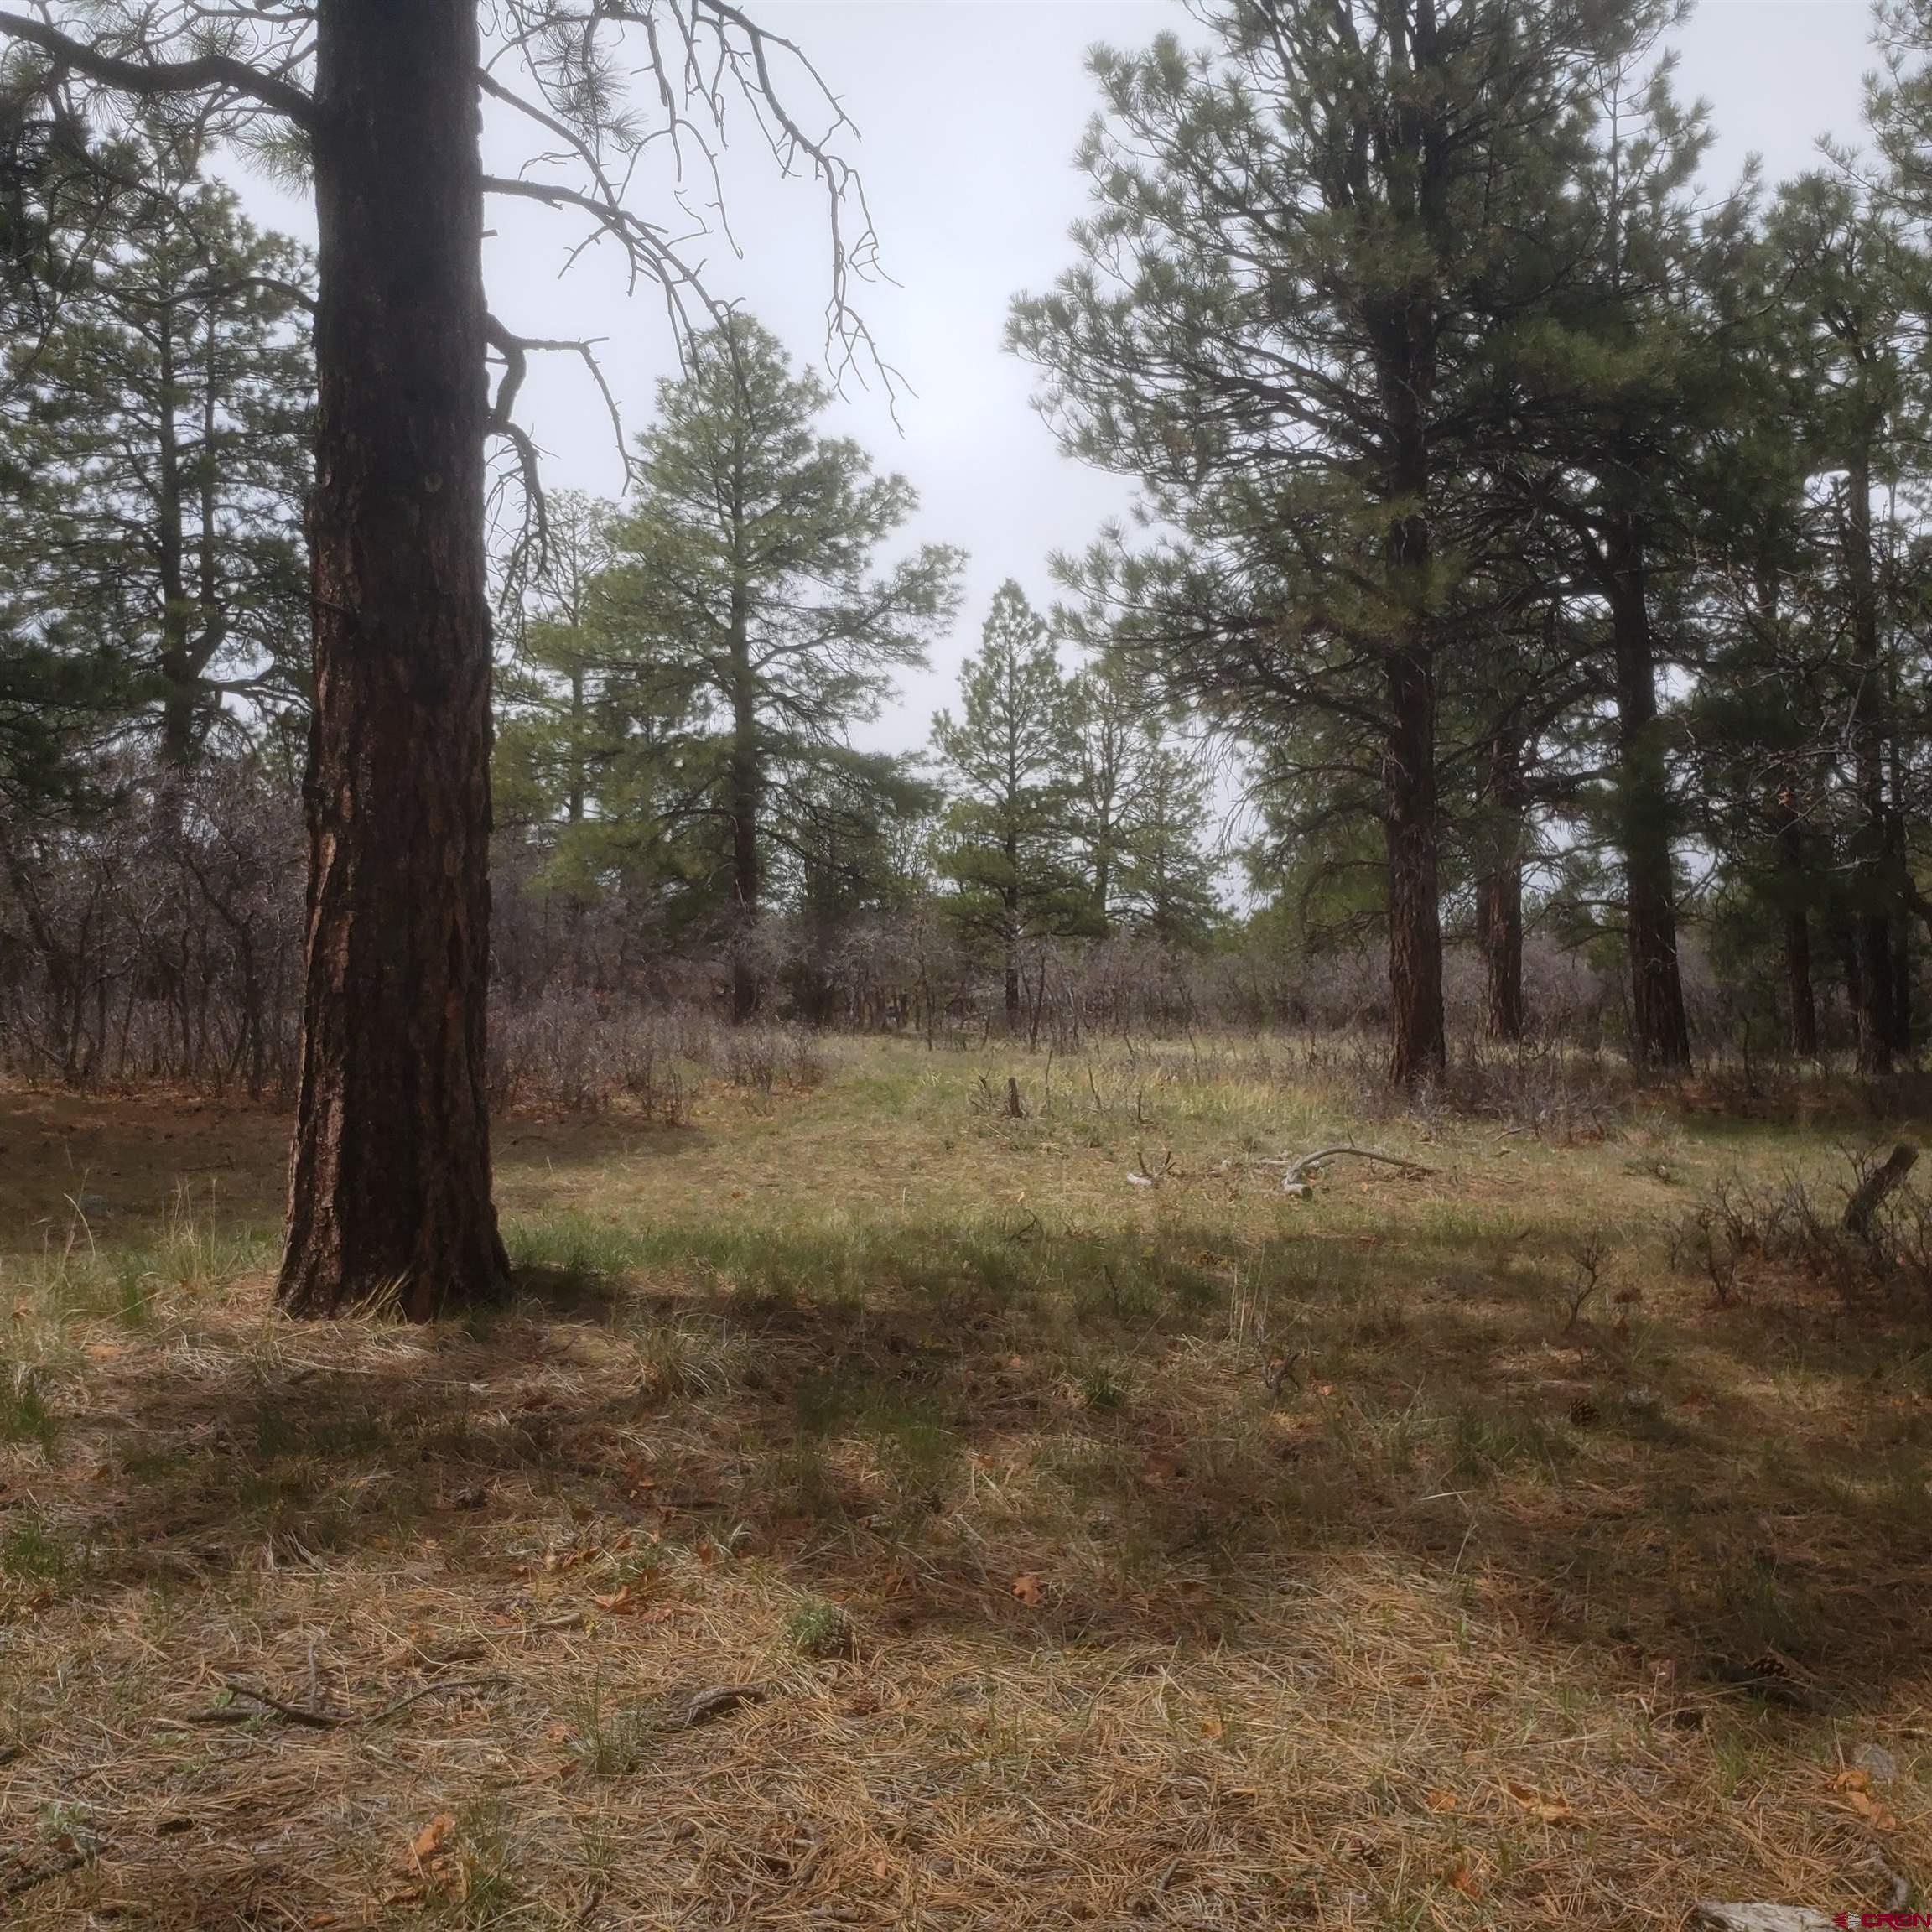 Are you ready to build your Colorado dream home?   Walk out your backdoor and an enjoy the beauty of the Divide Ranch and Club Golf Course.  Level terrain for ease of construction.   All utilities including fiberoptics internet to the lot line.  Mature growth Ponderosa pines.   Buyer to pay golf course membership transfer fee of $3,000 at closing. 15 minutes to the Town of Ridgway,  25 minutes to Montrose, and 45 minutes to Telluride.